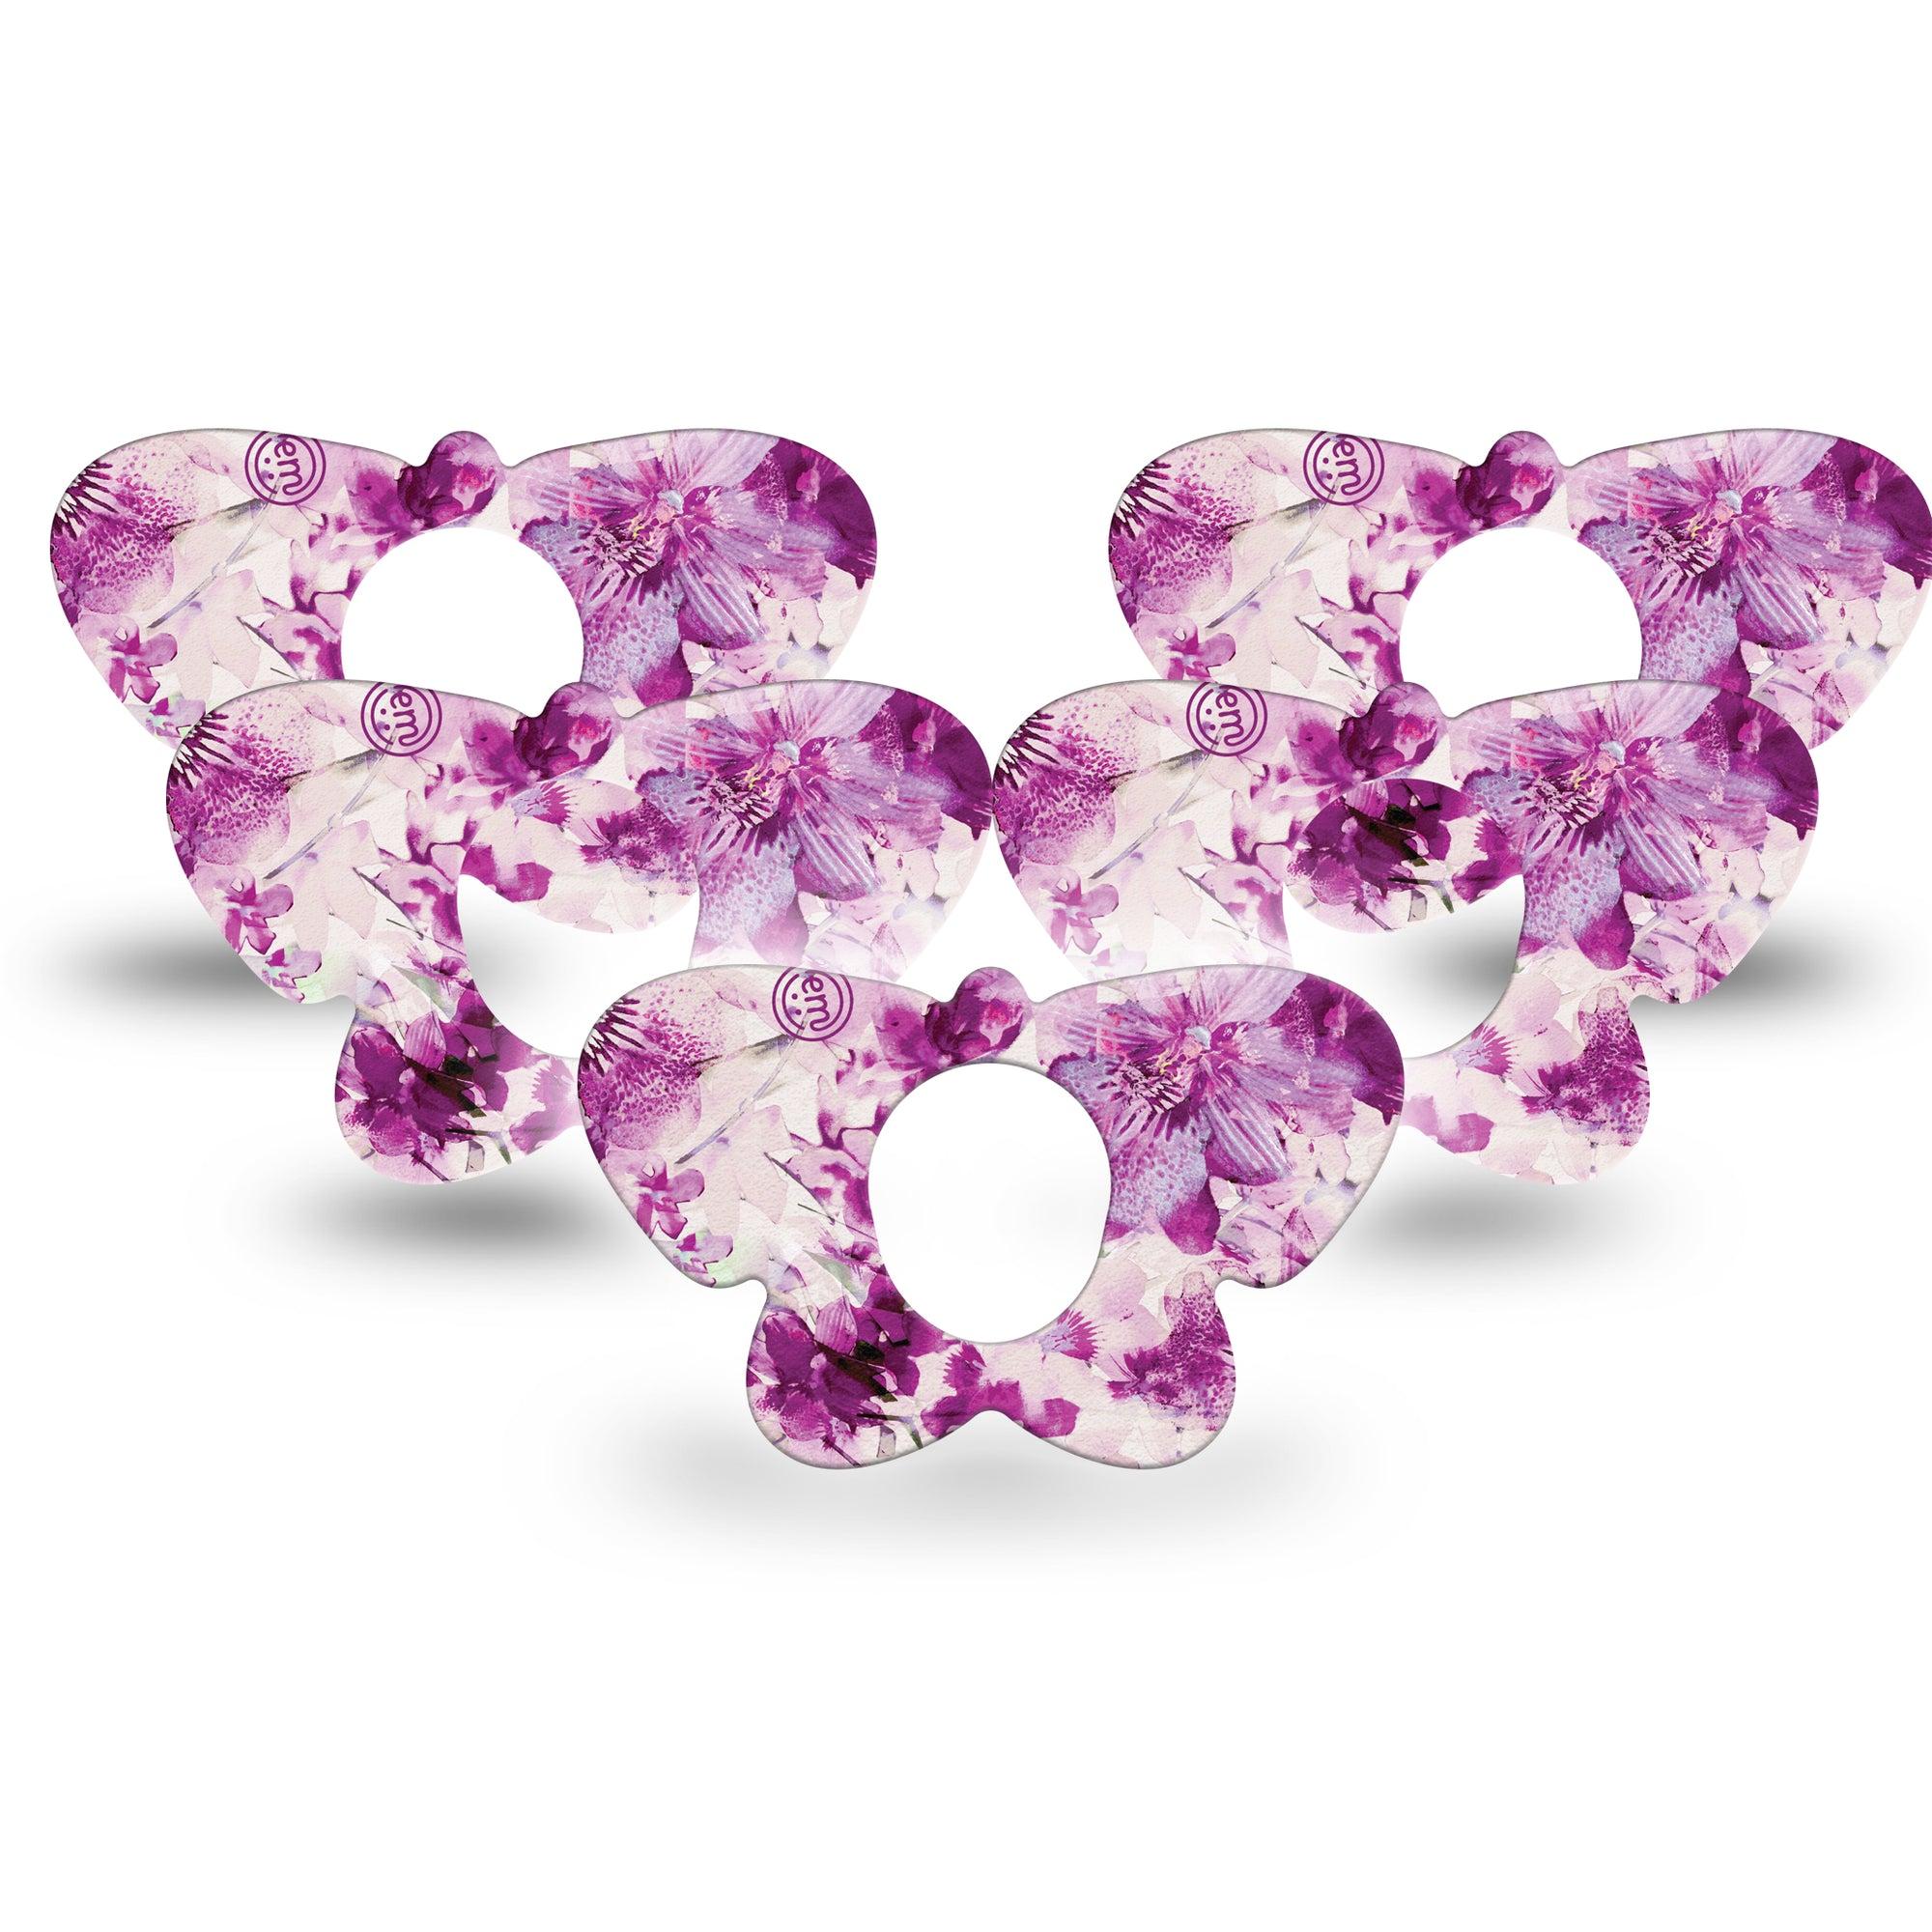 ExpressionMed Violet Orchids Butterfly Dexcom G7 Tape, 5-Pack, Magenta Flower Themed, CGM Overlay Patch Design